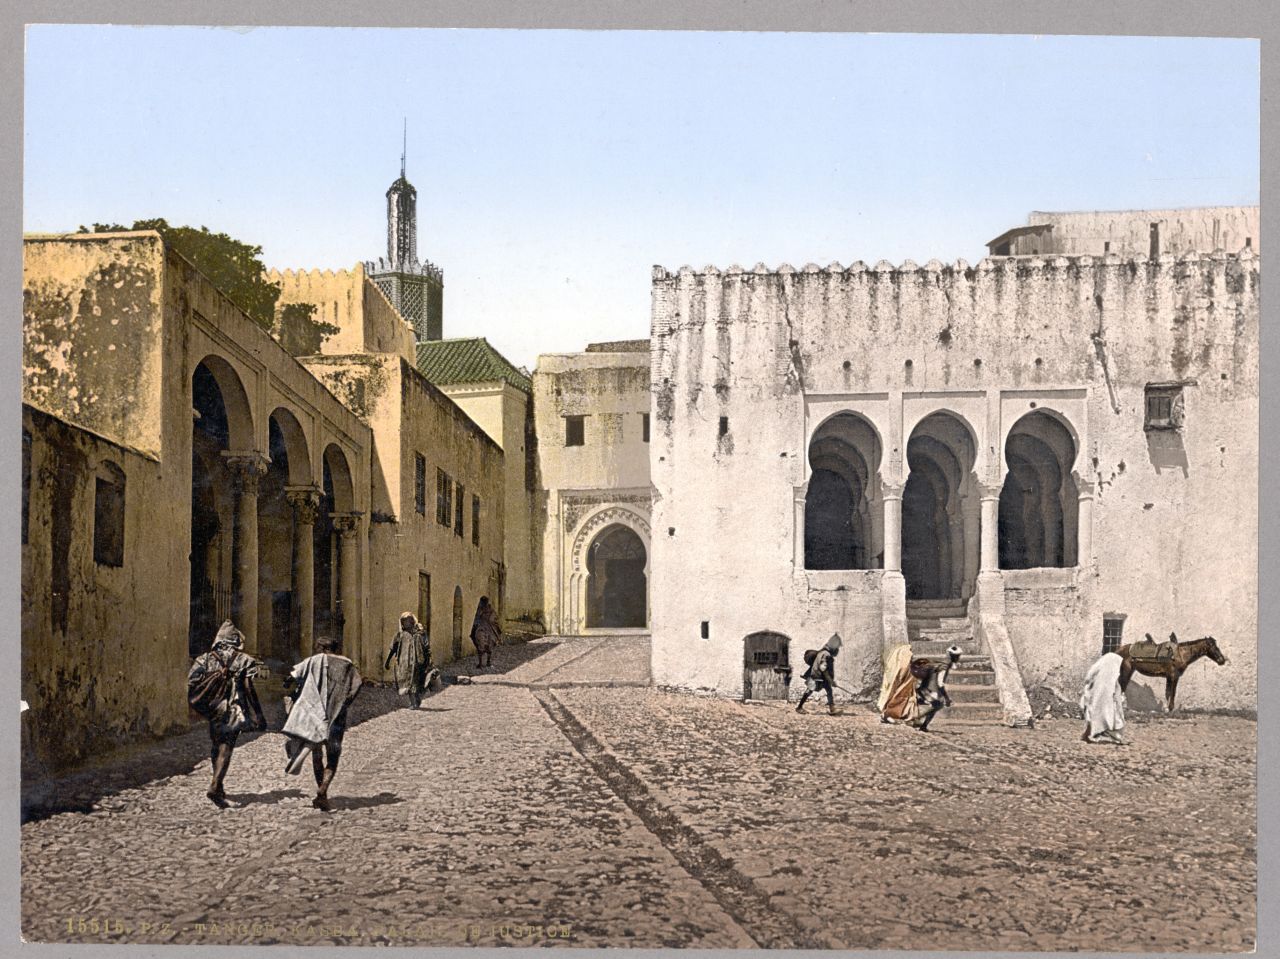 The Palace of Justice, Tangier, Morocco. Although not yet a colony at the time in which this photocrhom was taken, Morocco was nonetheless heavily influenced by Europeans, France and Spain later enforcing a protectorate.